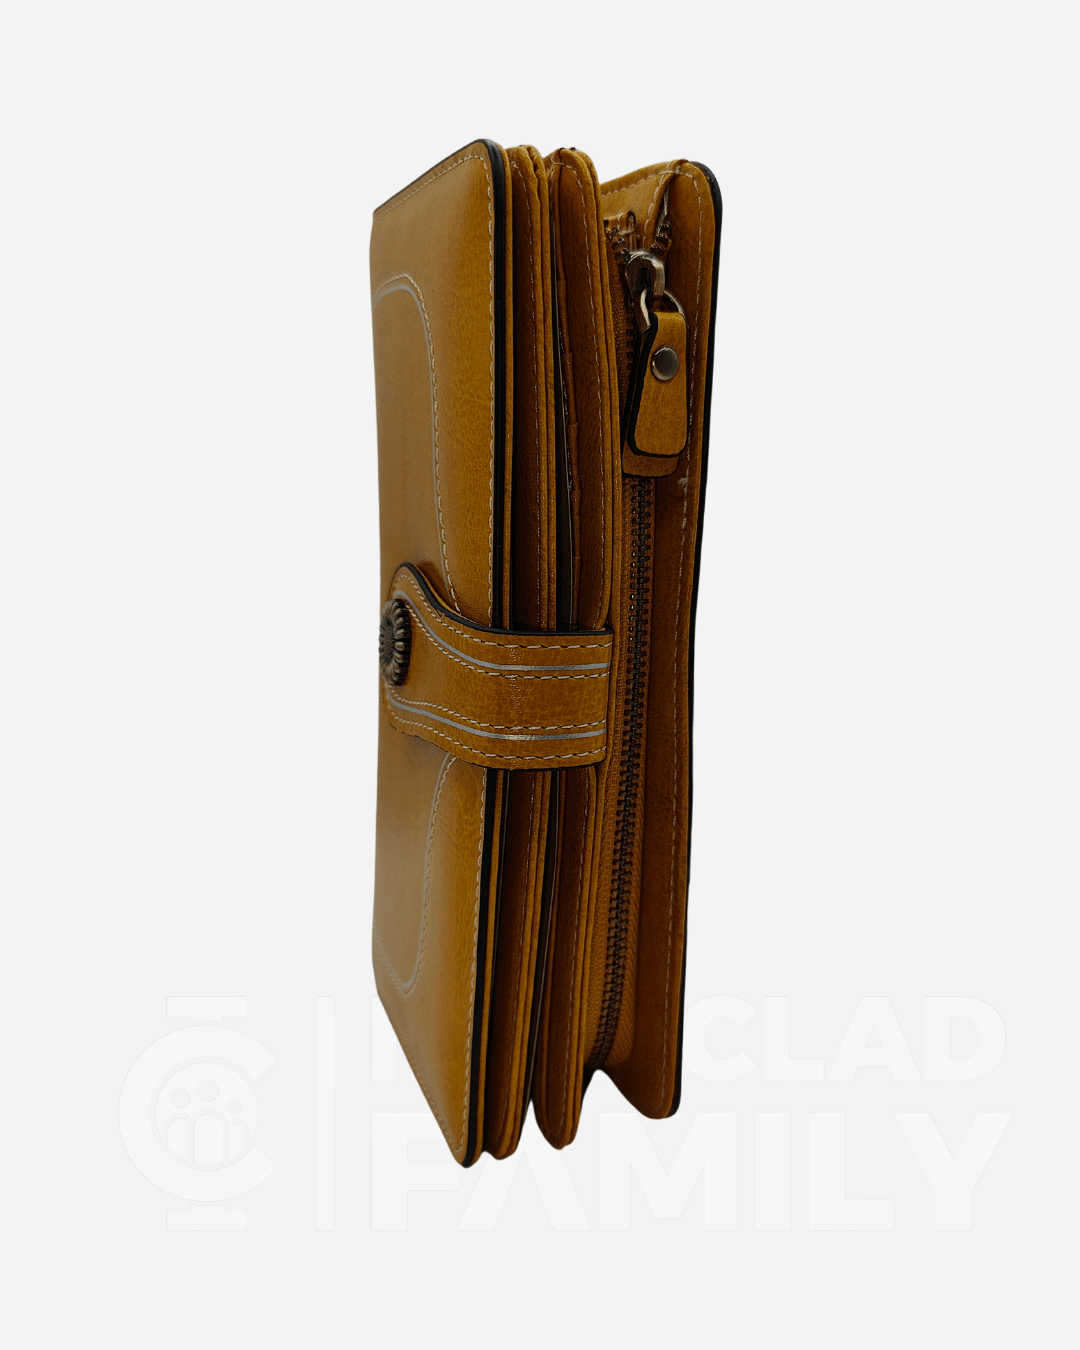 Brown RFID-blocking wallet featuring two compartments and a zipper closure